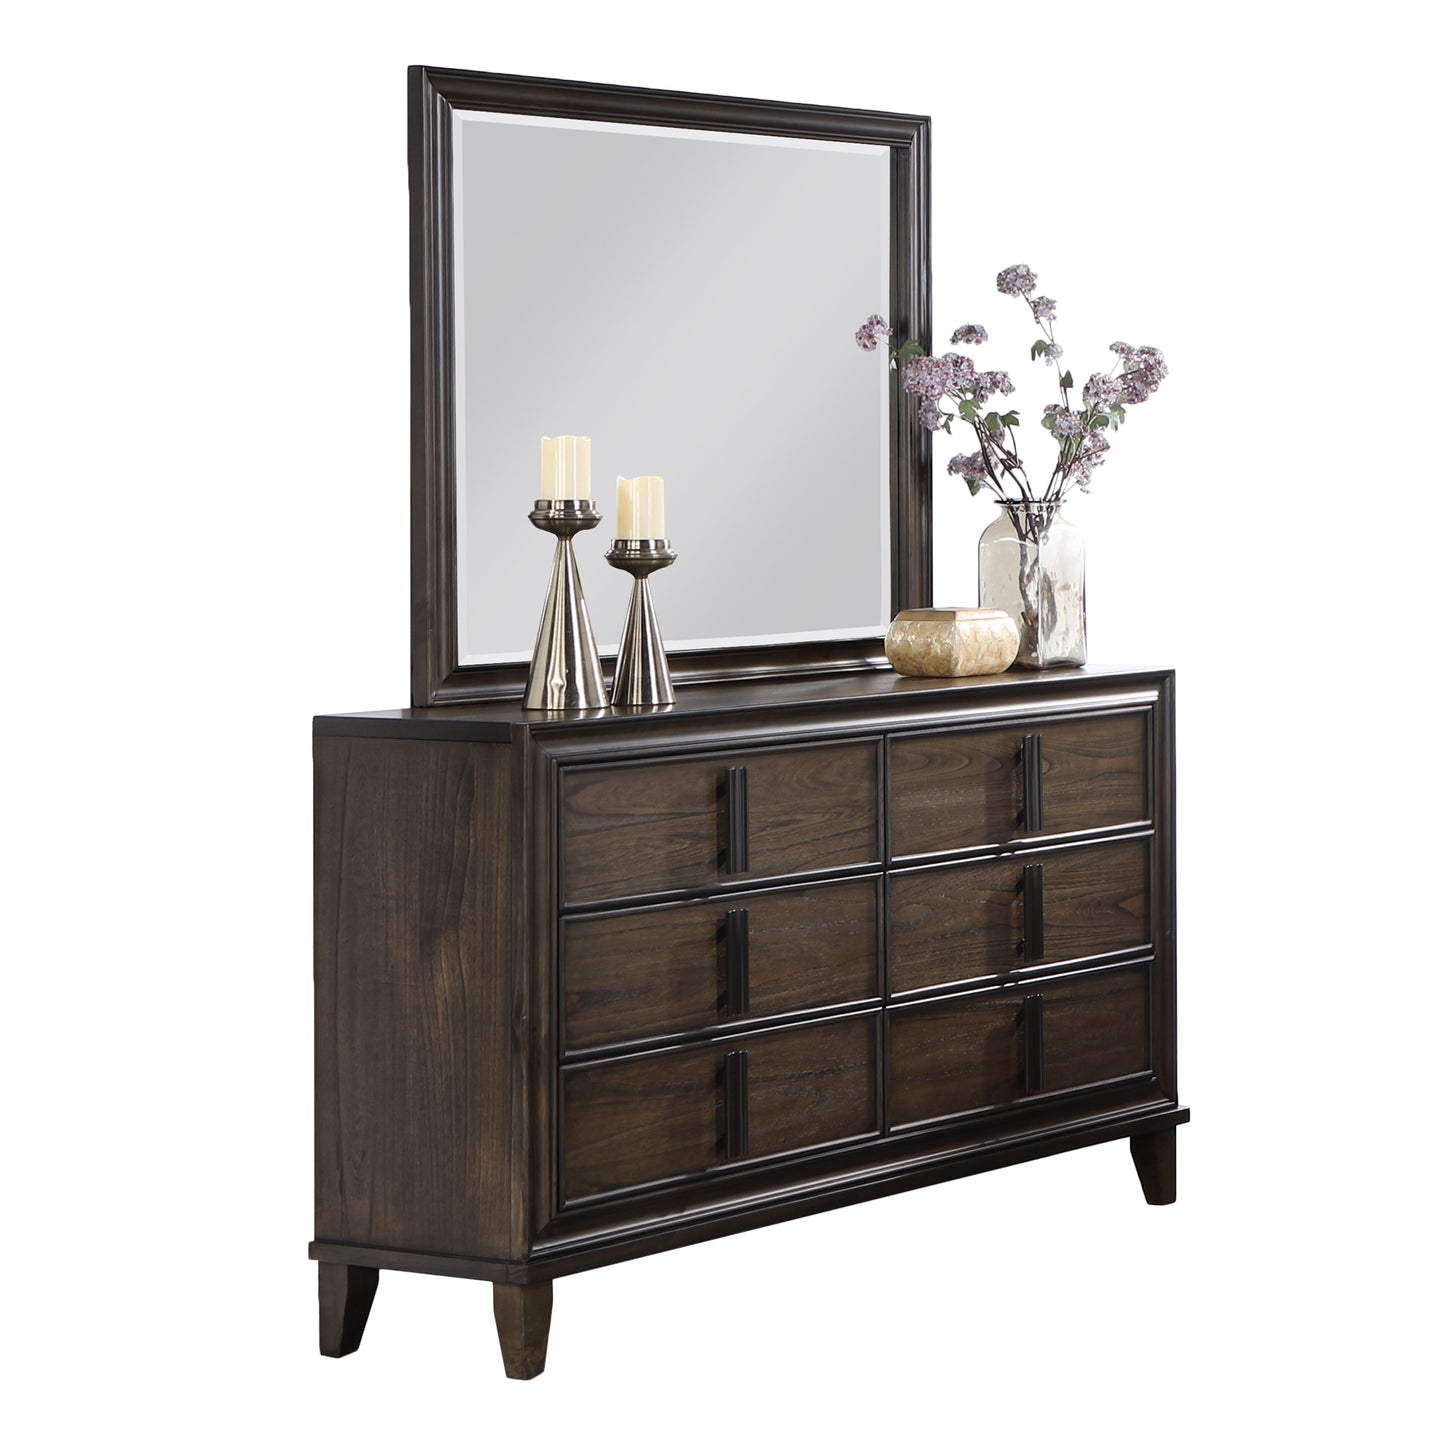 Aetheria Contemporary Wood Bedroom Collection, Dark Brown